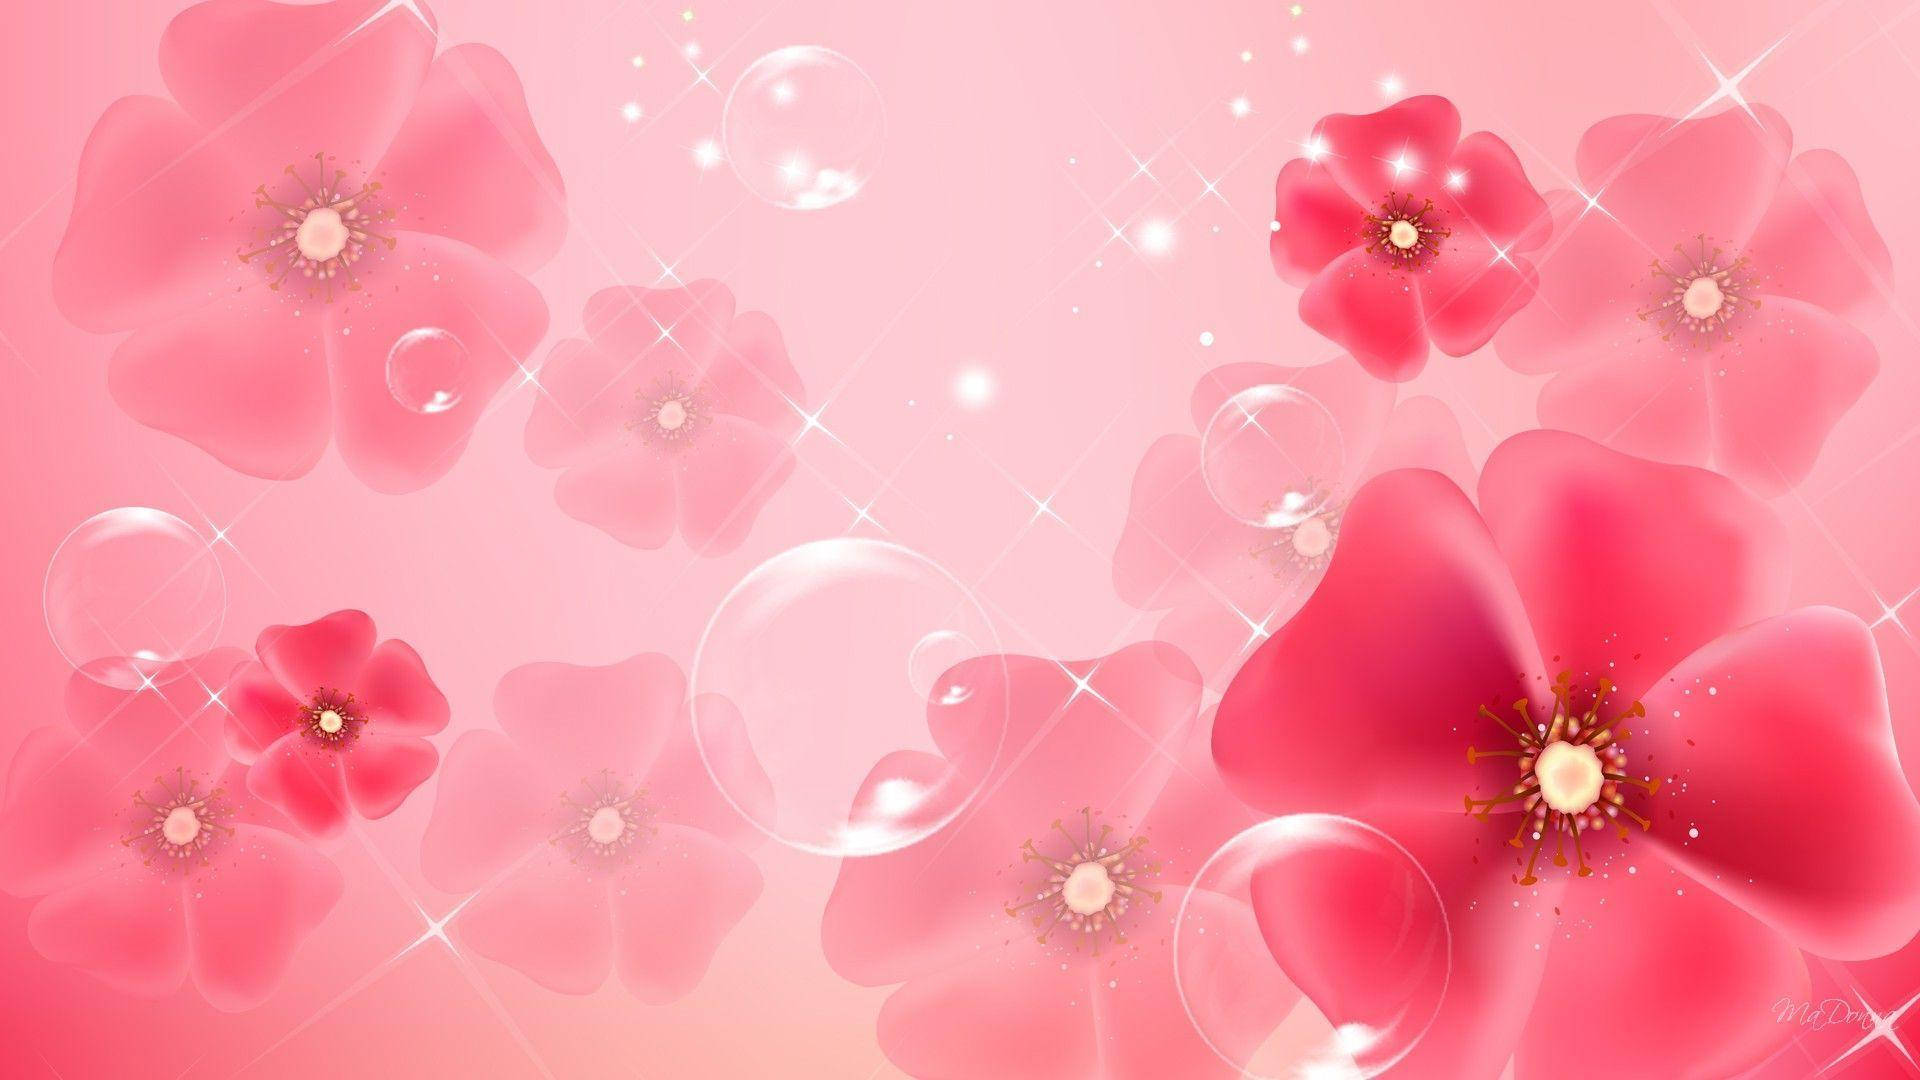 Light Pink Flowers And Bubbles Picture